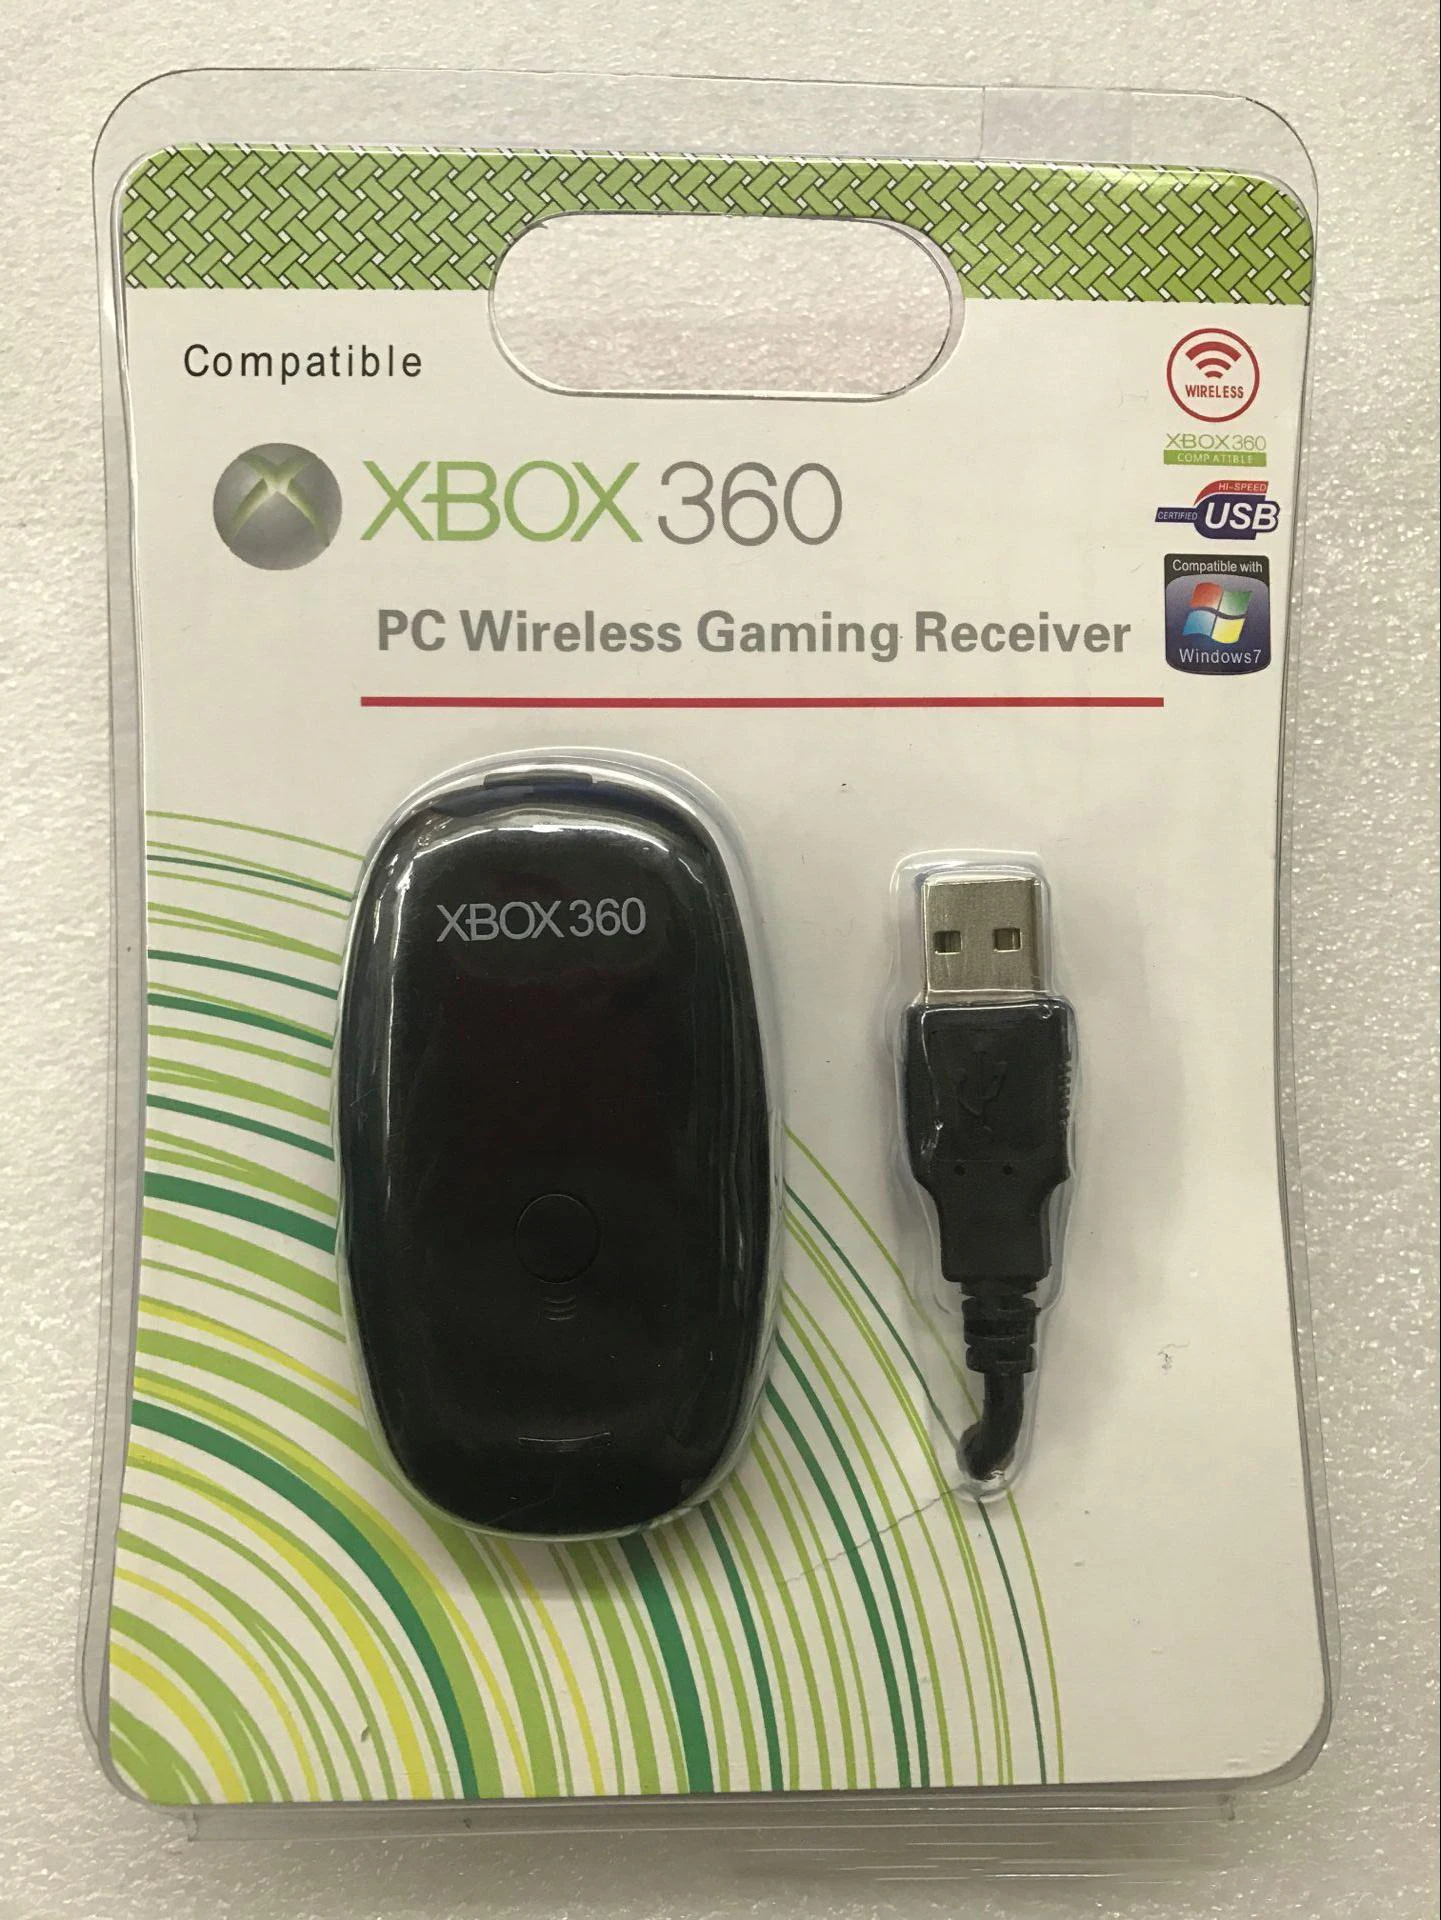 Samengroeiing Moedig Maan oppervlakte PC Wireless Receiver Adapter For Microsoft XBOX 360 Controller Gaming USB  For Xbox360 Windows XP/7/8/10 Free Shipping|Replacement Parts &  Accessories| - AliExpress